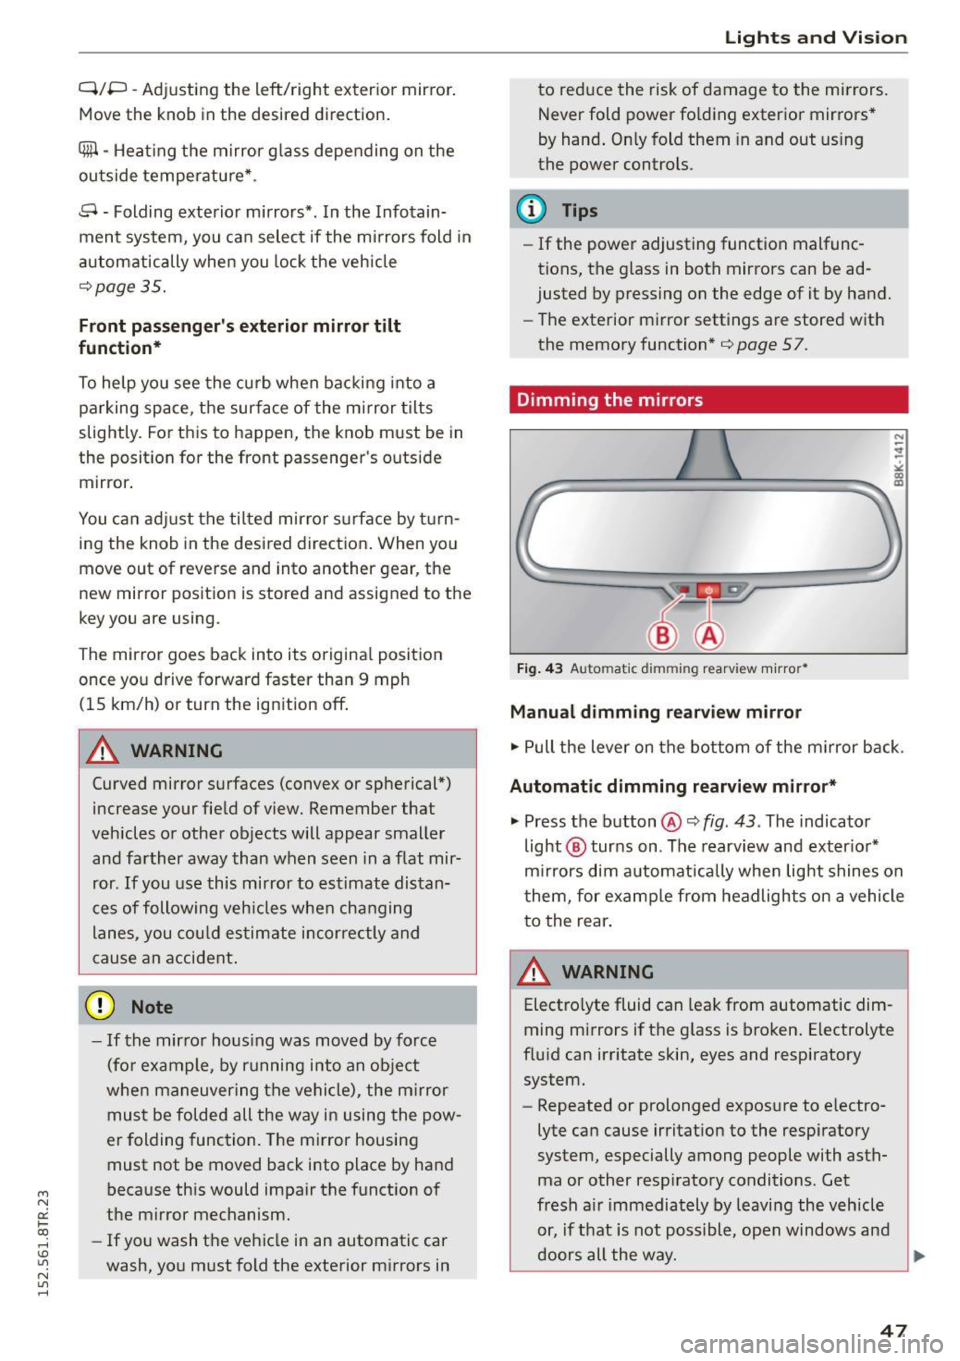 AUDI RS5 COUPE 2015  Owners Manual " N 
0:: l­oo 
rl I.O 
" N 
" rl 
Q/P -Adjusting  the  left/right  exterior mirror. 
Move  the knob  in  the desired  direction. 
®-Heat ing  the  mirror  g lass  depending  on  the 
ou tside  te